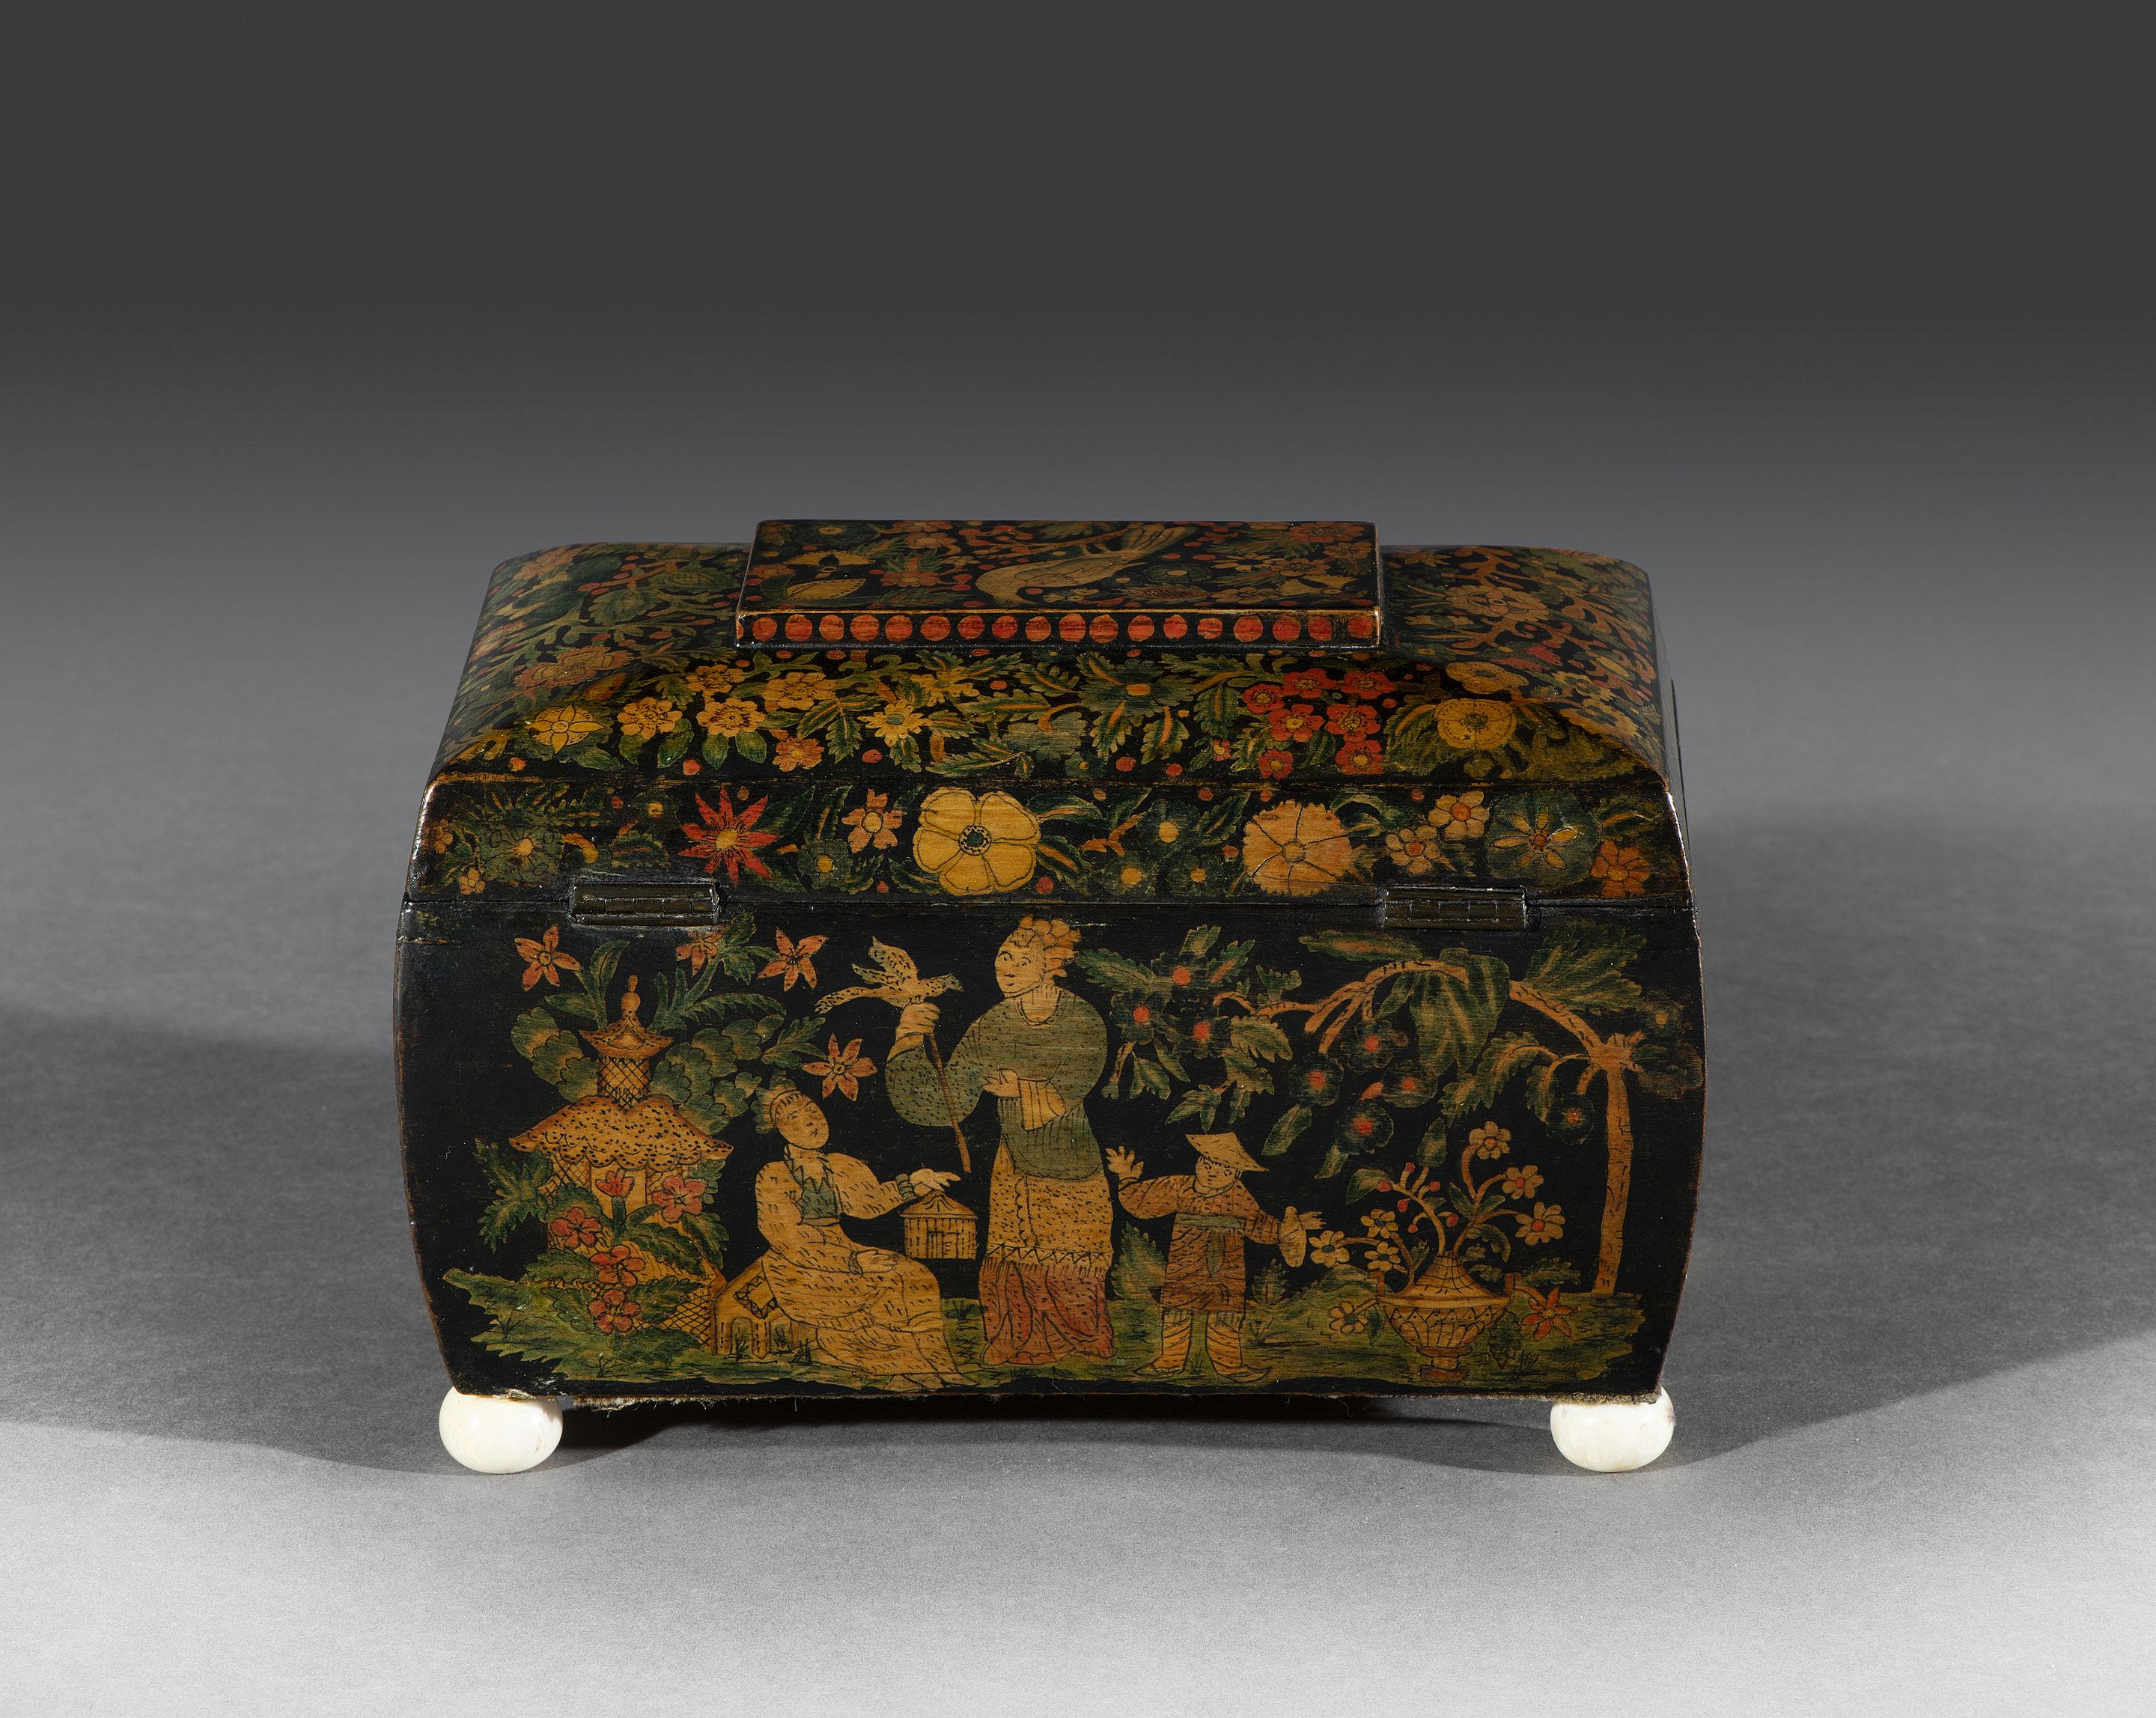 The tea caddy top is profusely decorated with exotic flowers and foliage and centred with a bird perched on a branch. The lid opens to reveal two compartments with the original coloured lids which retain the original colours of 'the day'. The tea